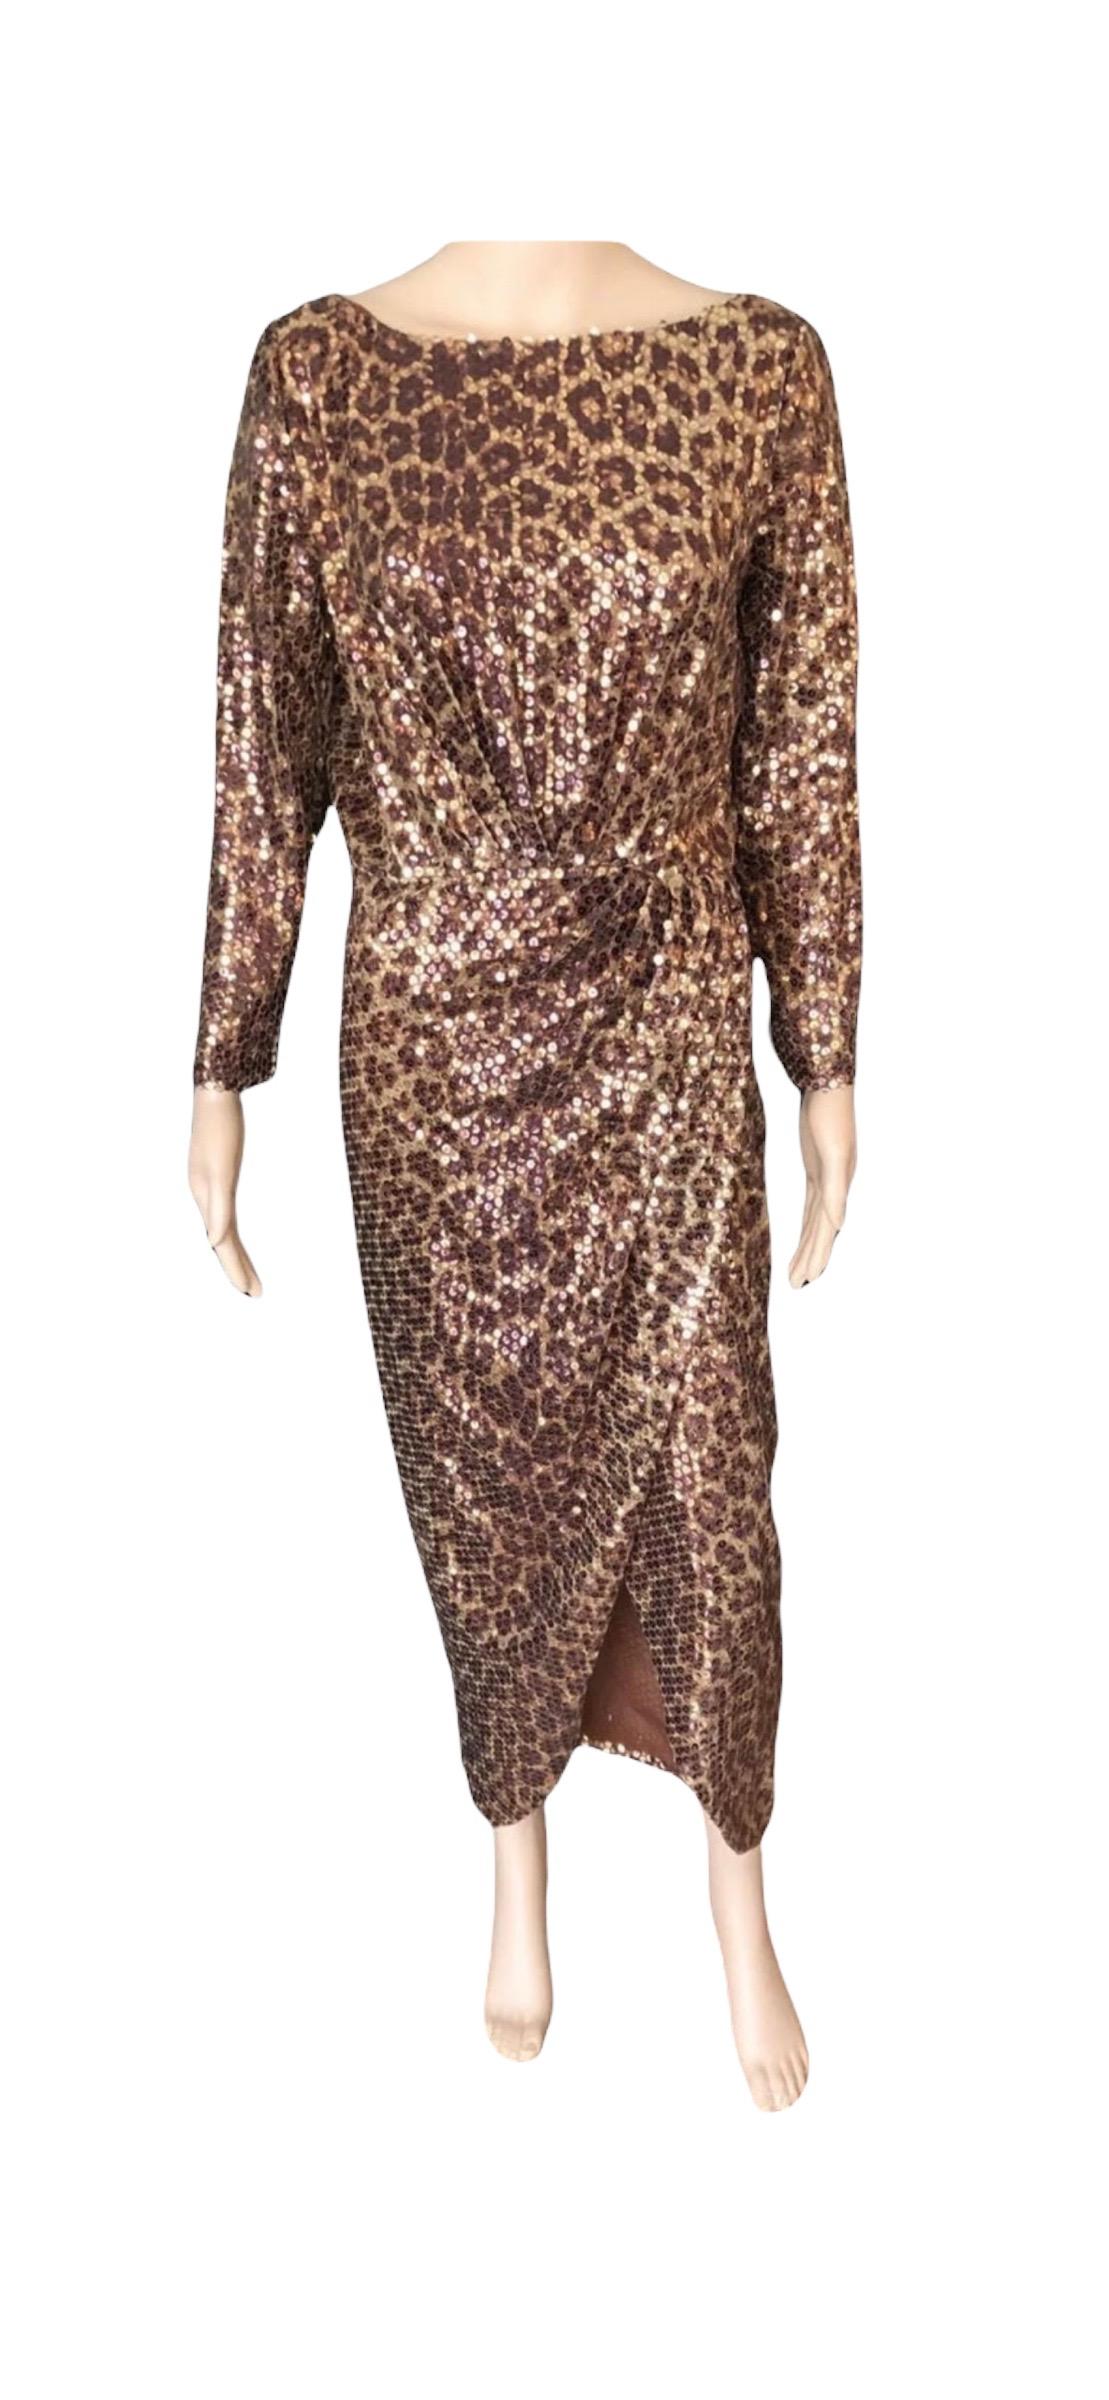 Brown Roberto Cavalli F/W 2007 Runway Sequin Embellished Open Back Evening Dress Gown For Sale